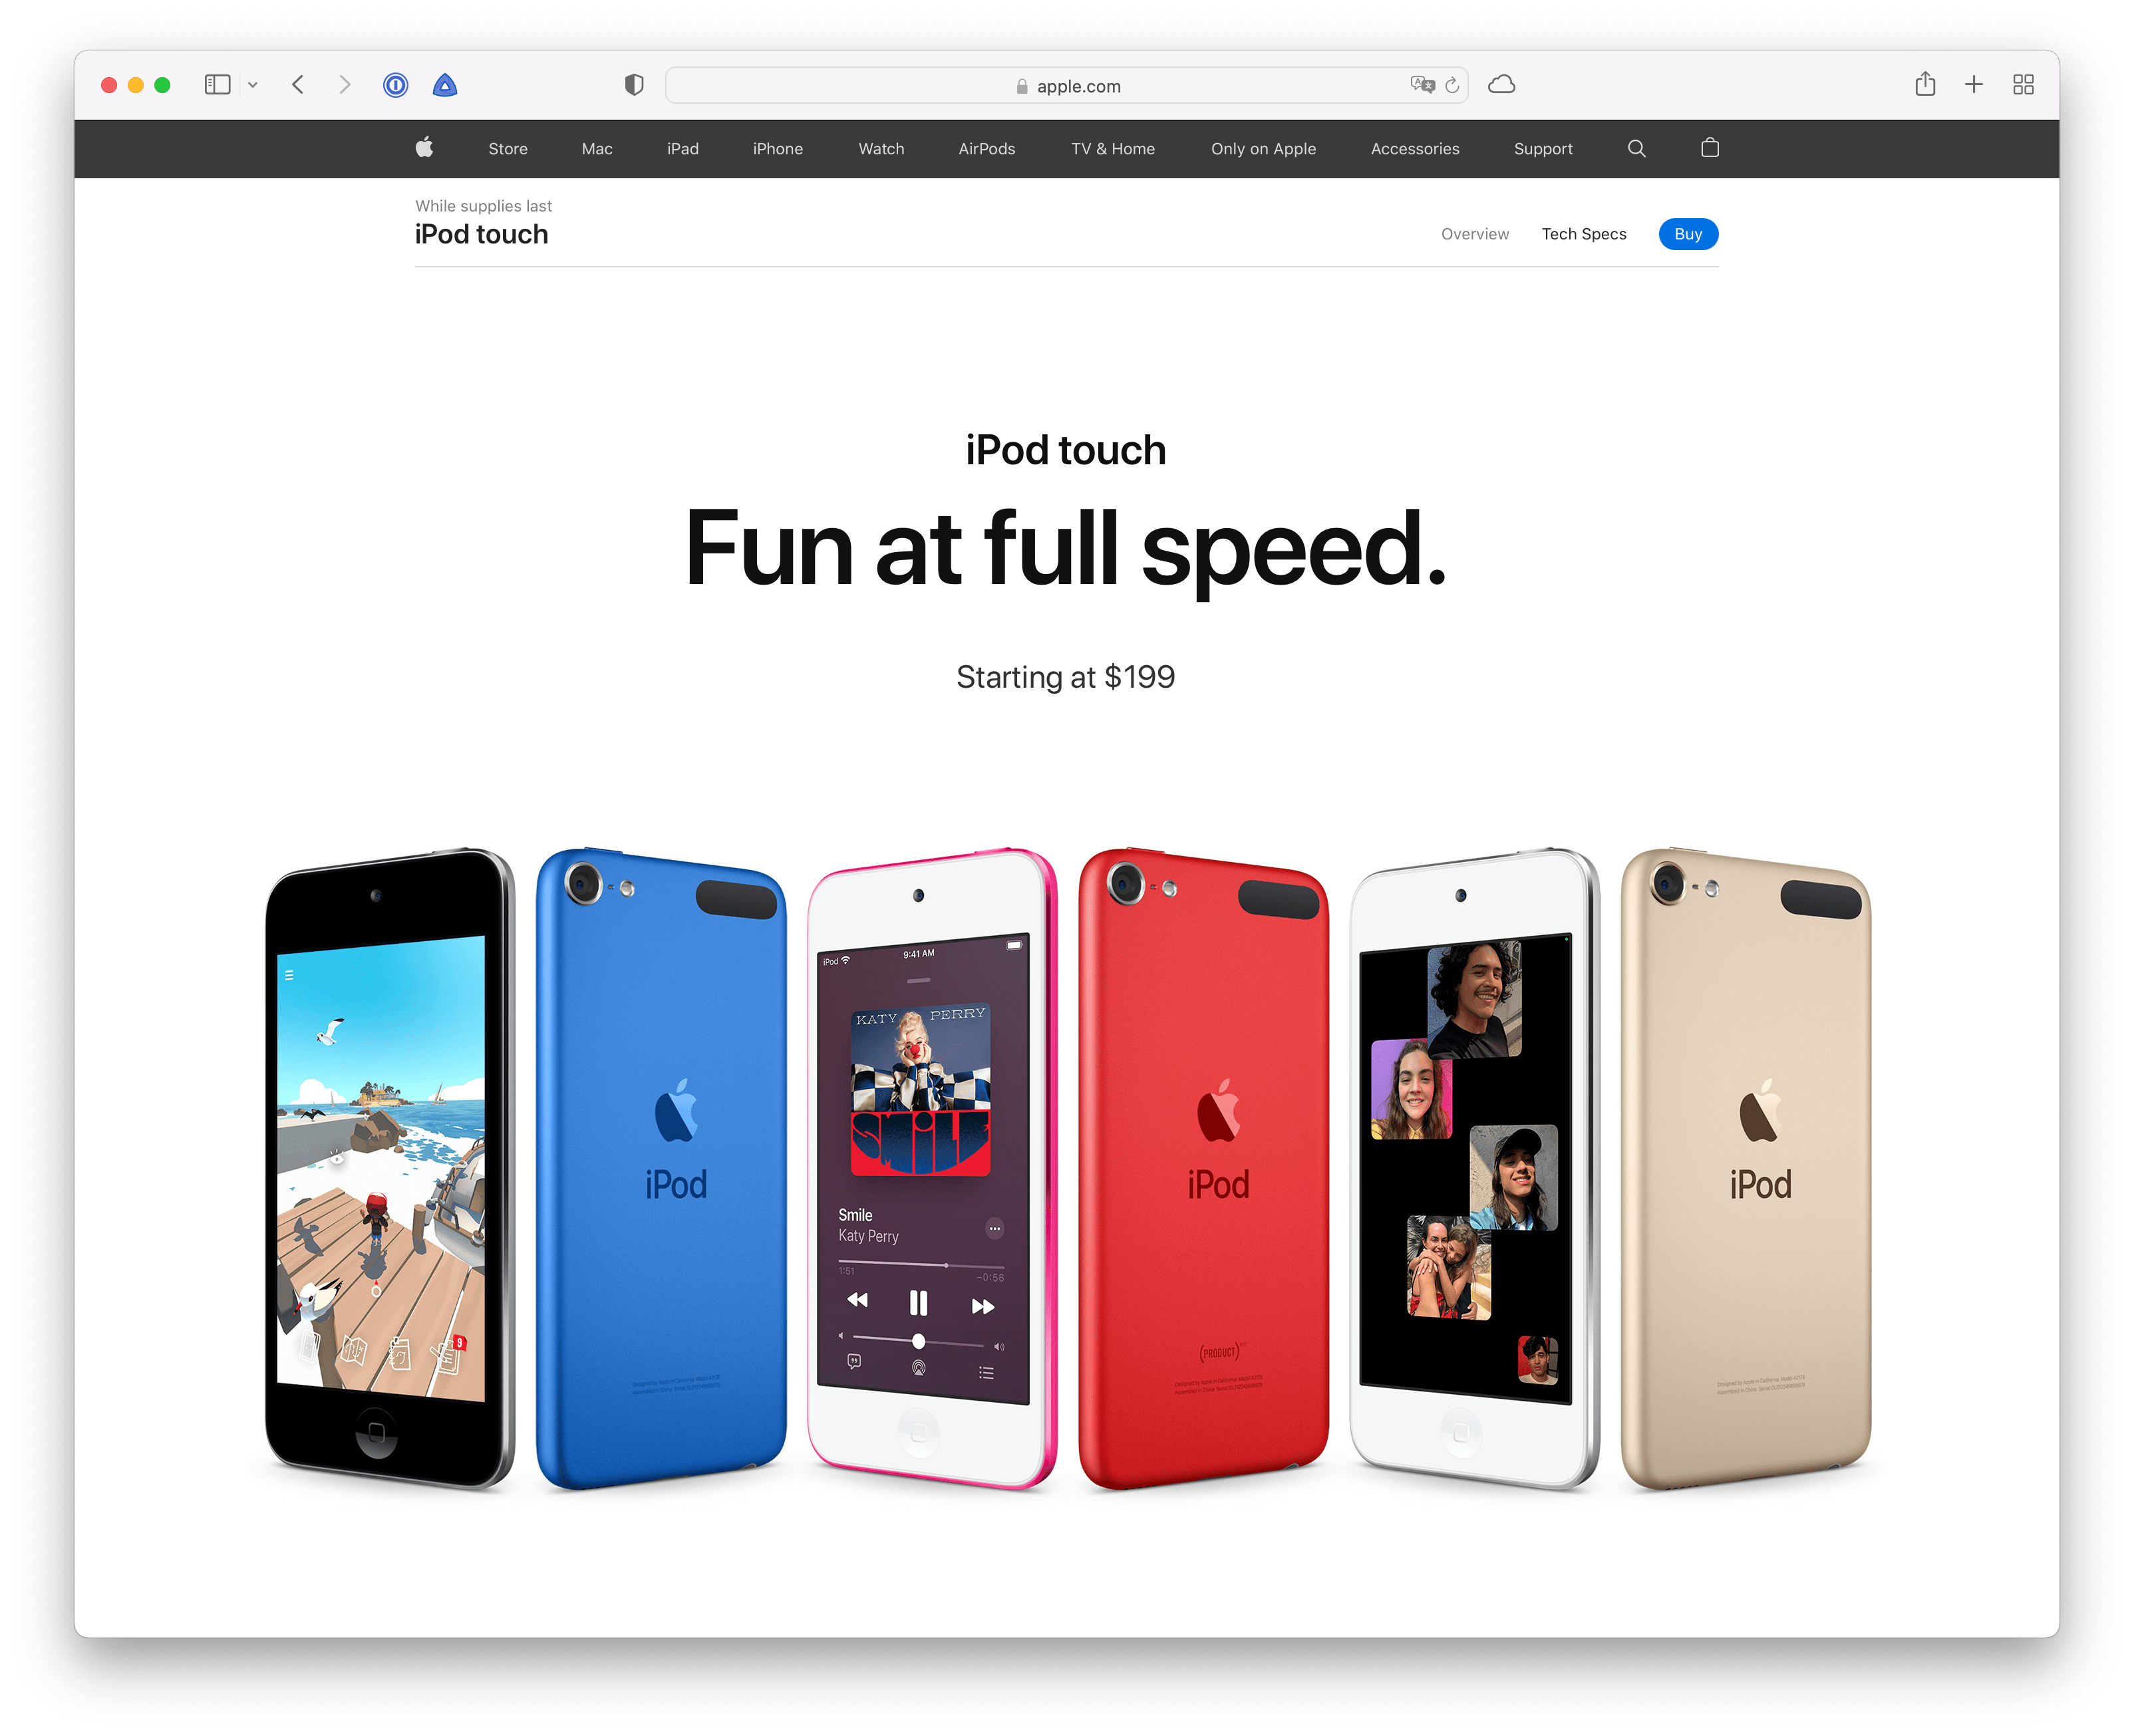 iPod touch website.